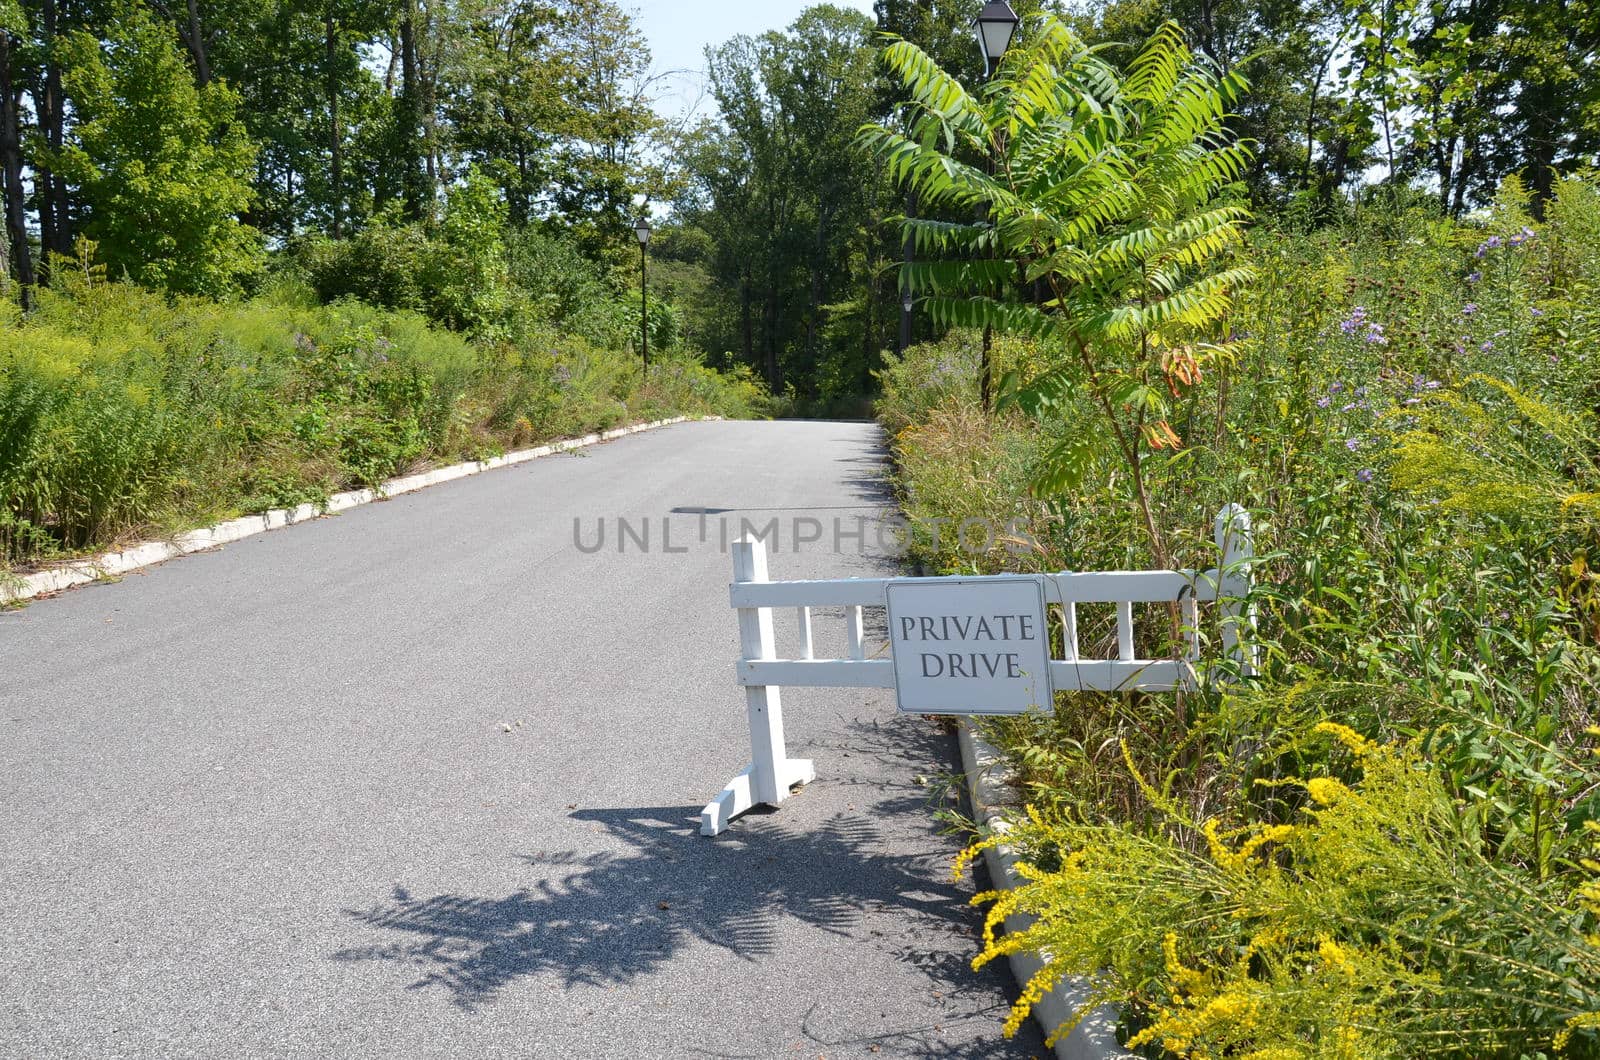 private drive sign or barricade and road with plants